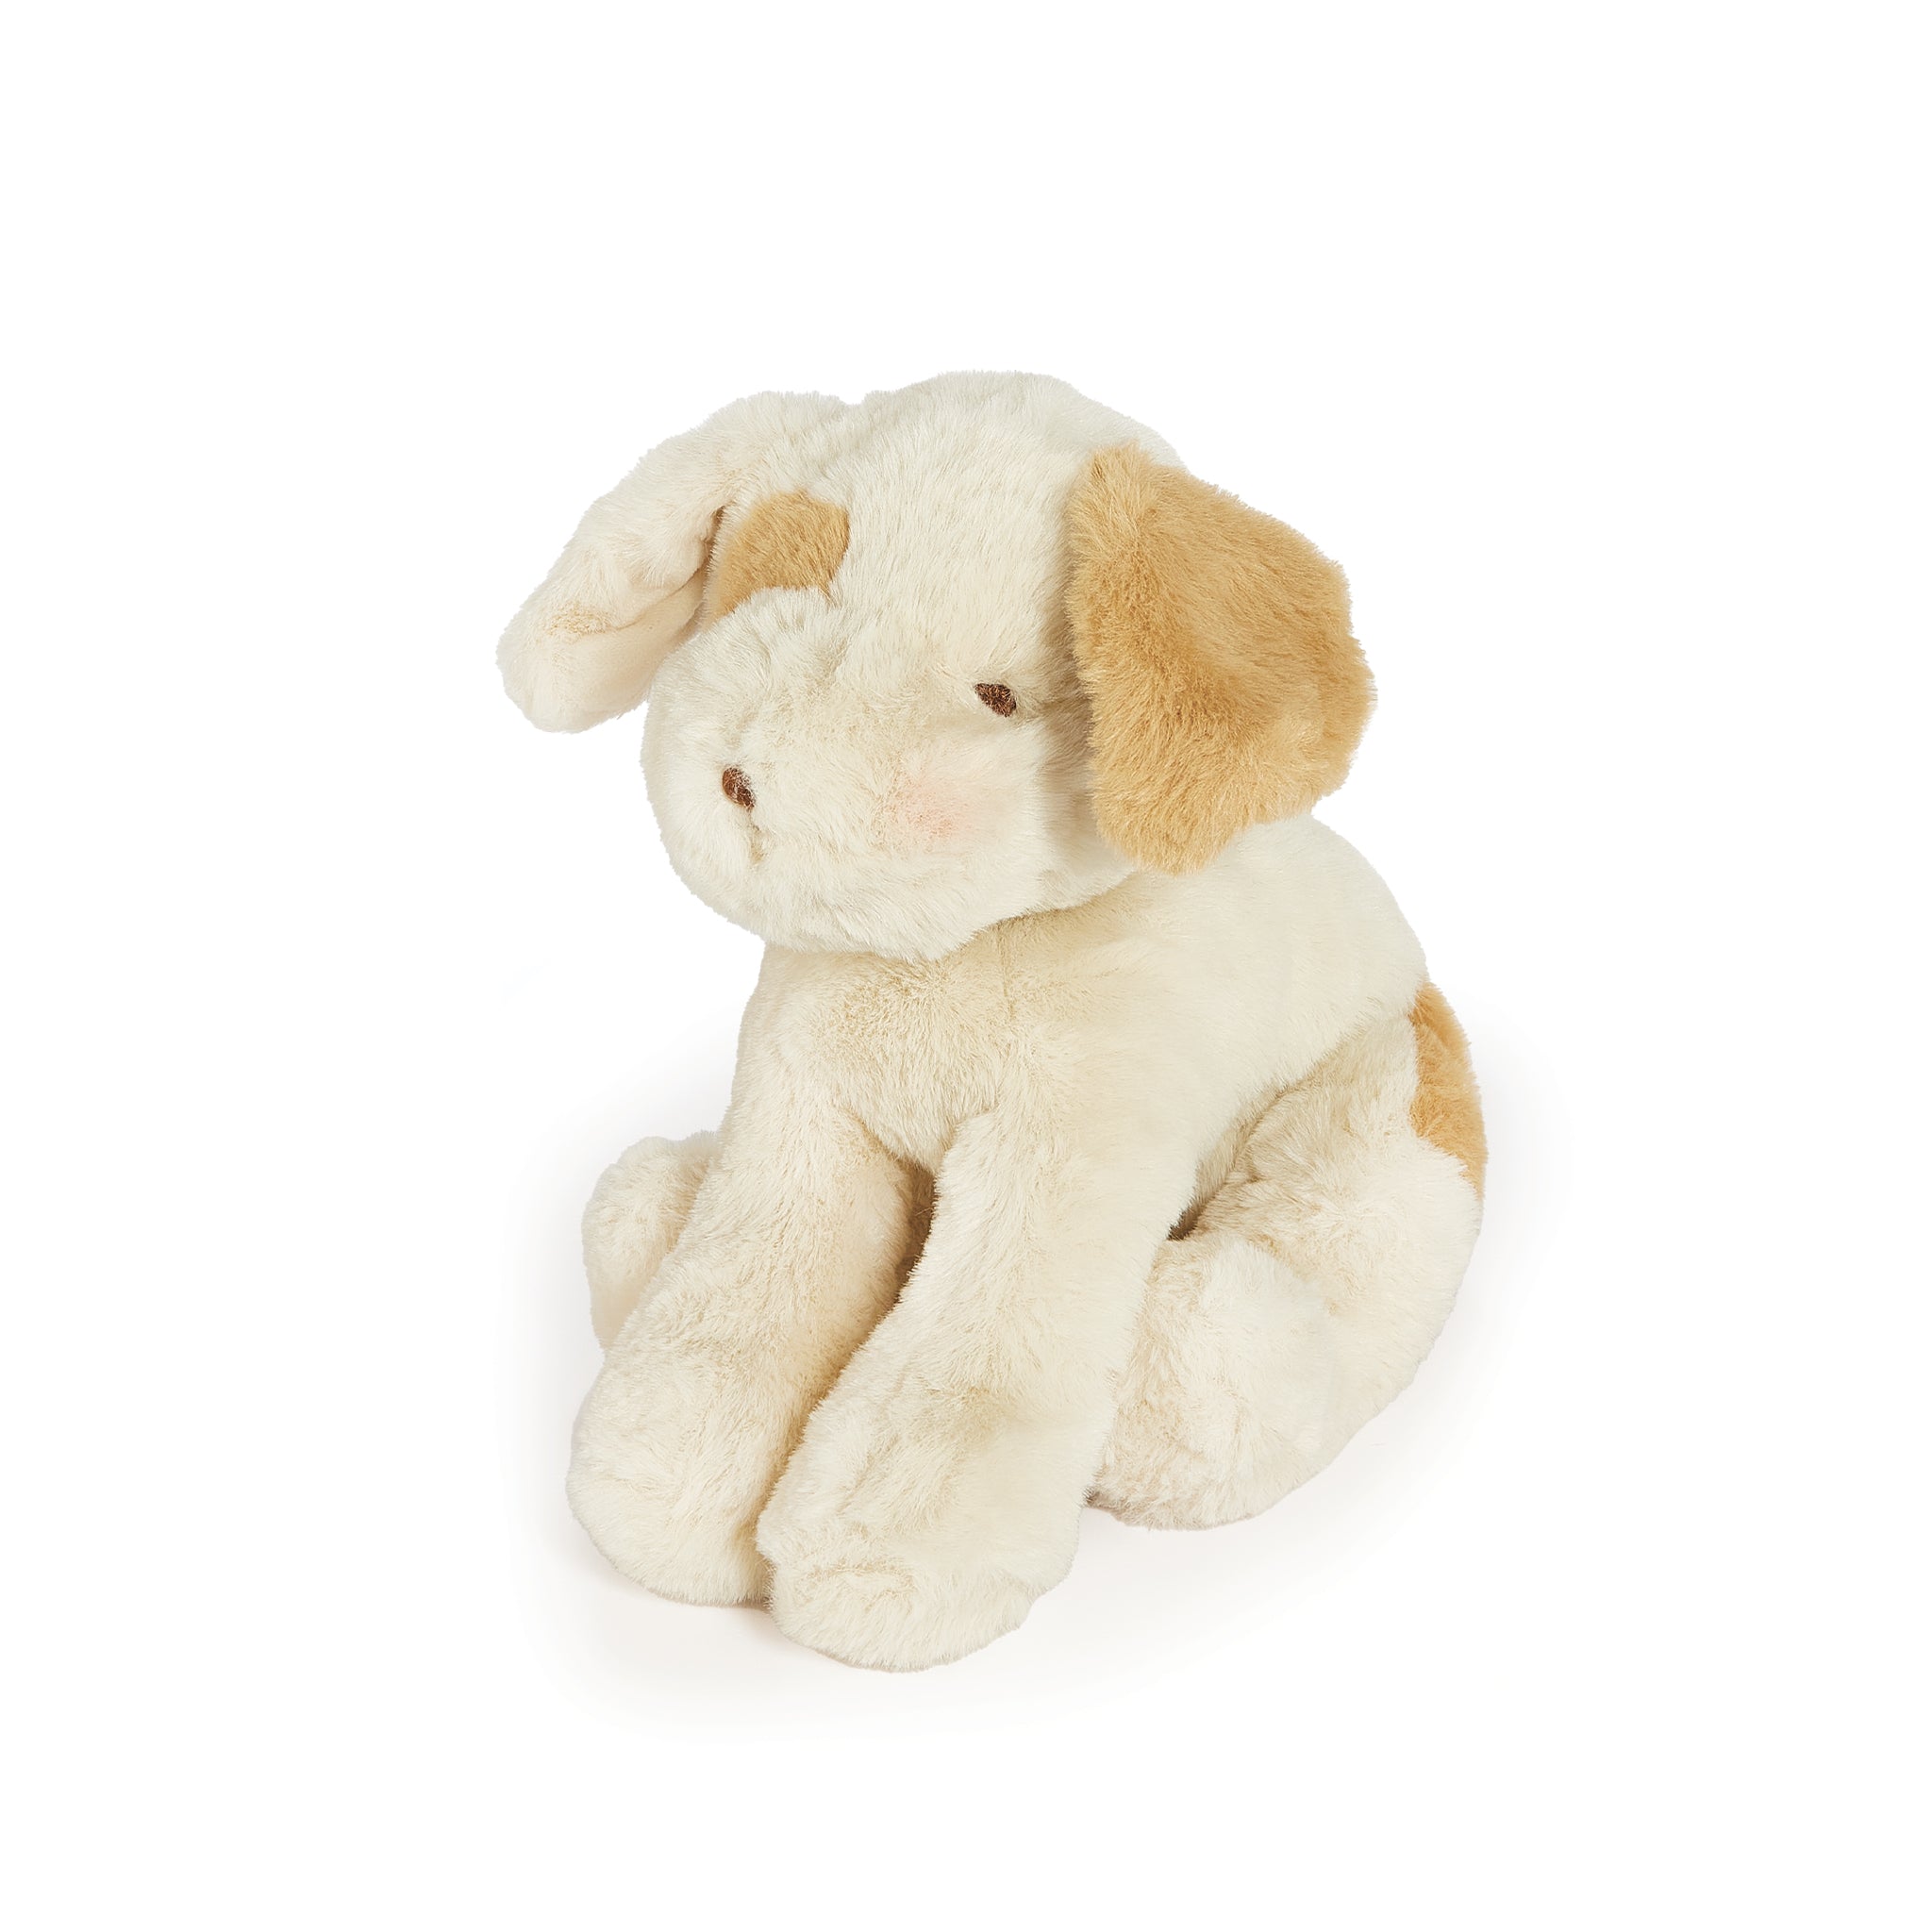 Little Skipit 12" Pup-Stuffed Animal-SKU: 100410 - Bunnies By The Bay